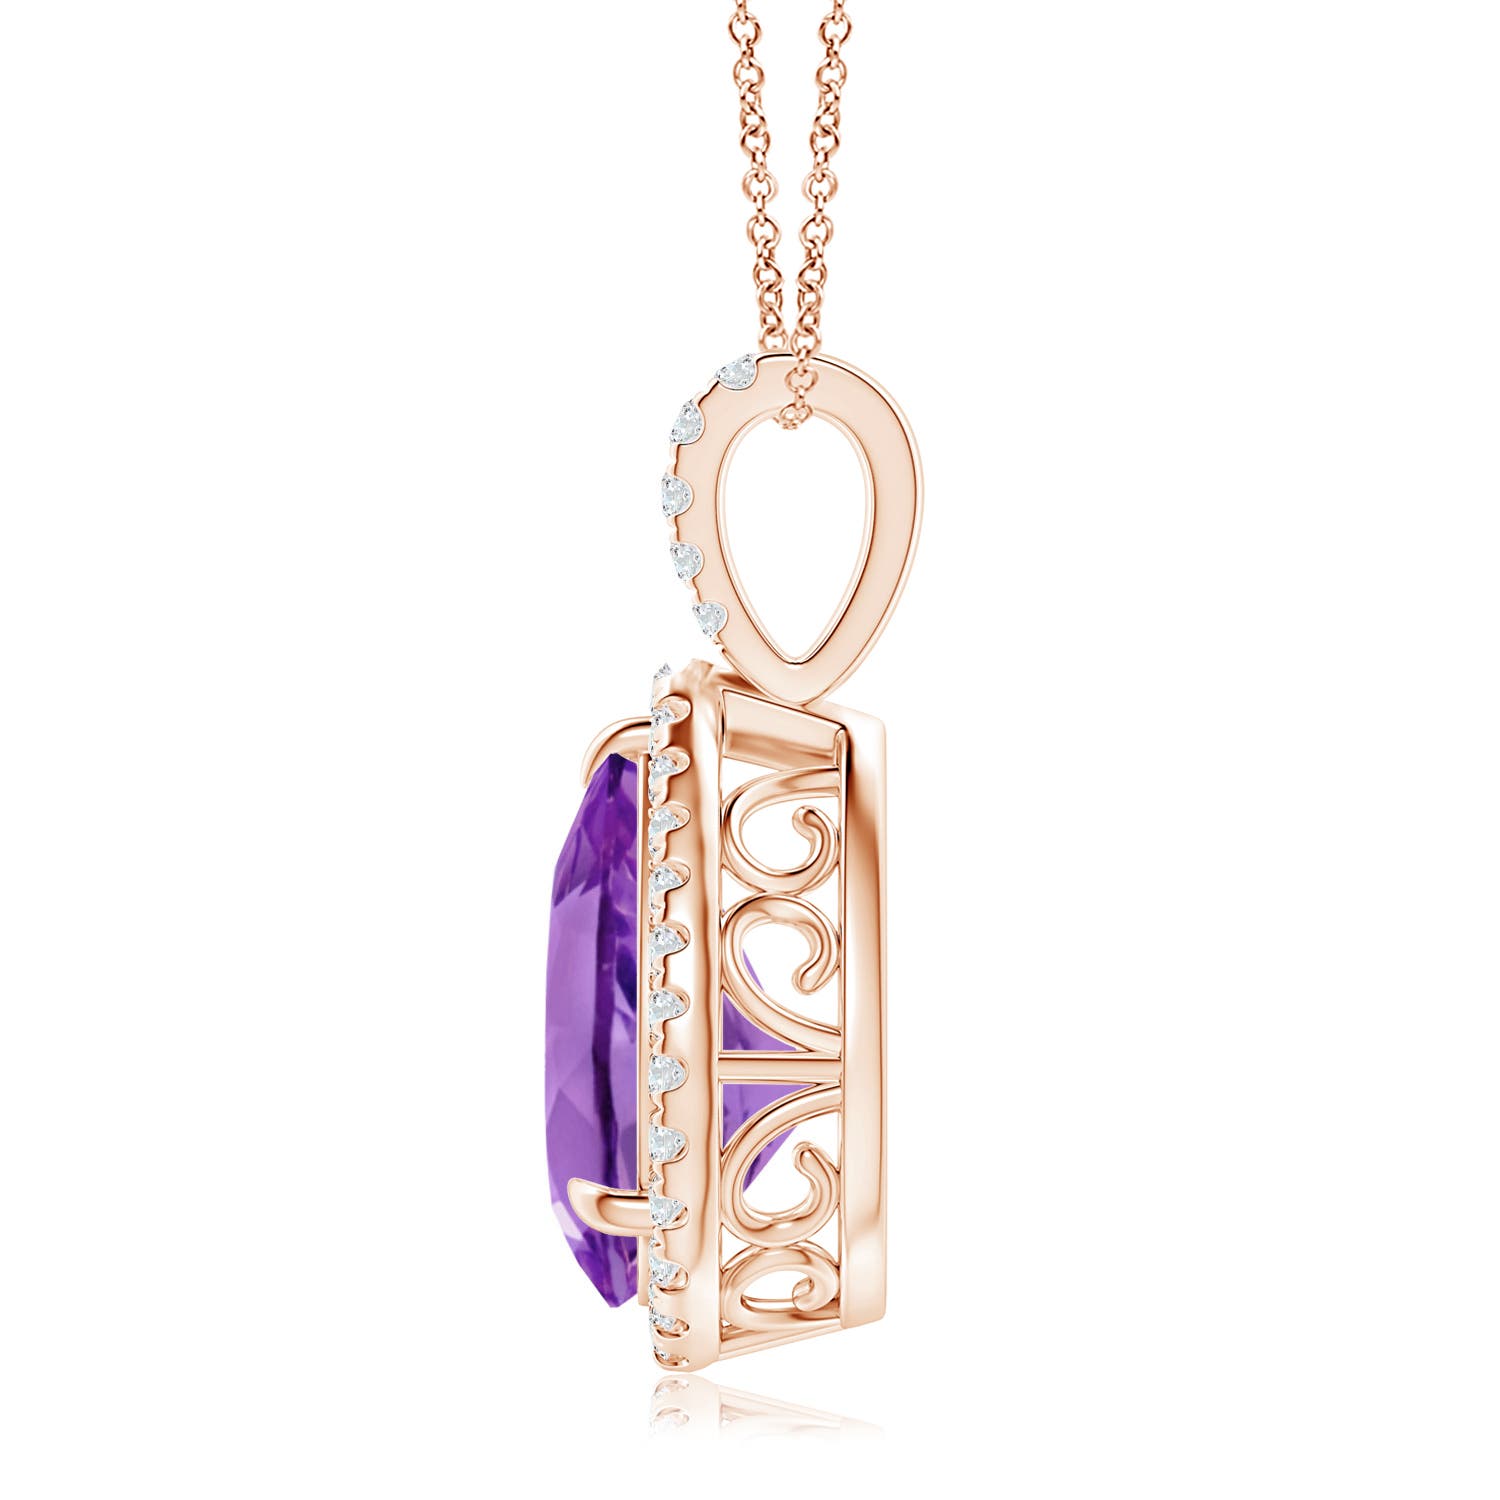 AA - Amethyst / 2.85 CT / 14 KT Rose Gold